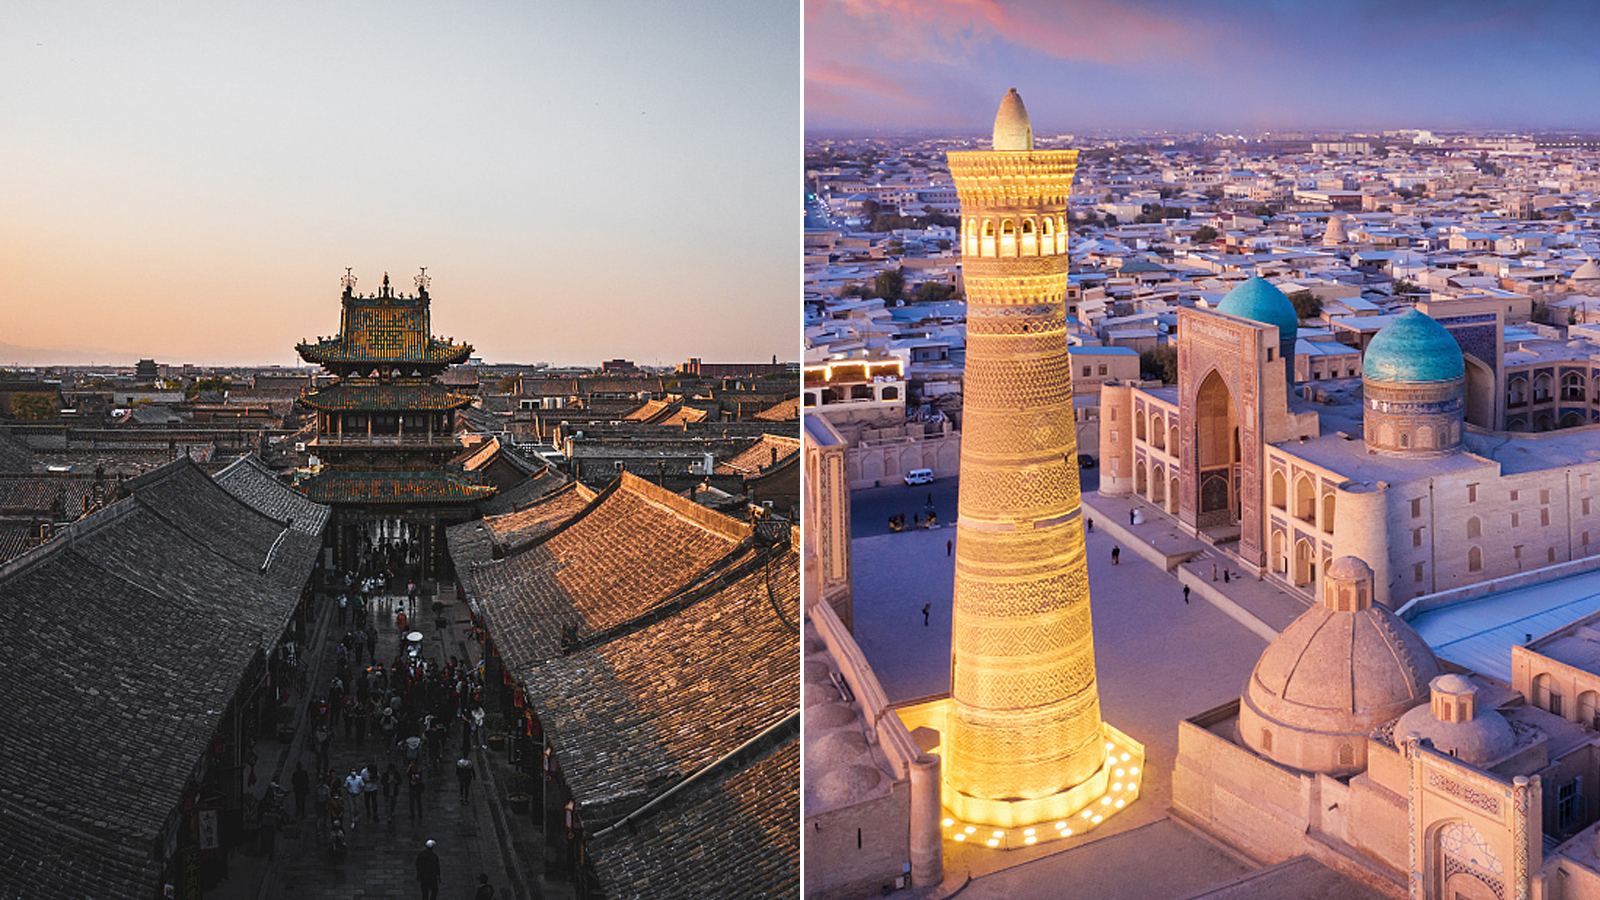 The Ancient City of Pingyao in China (left) and the Historic Centre of Bukhara in Uzbekistan /CFP